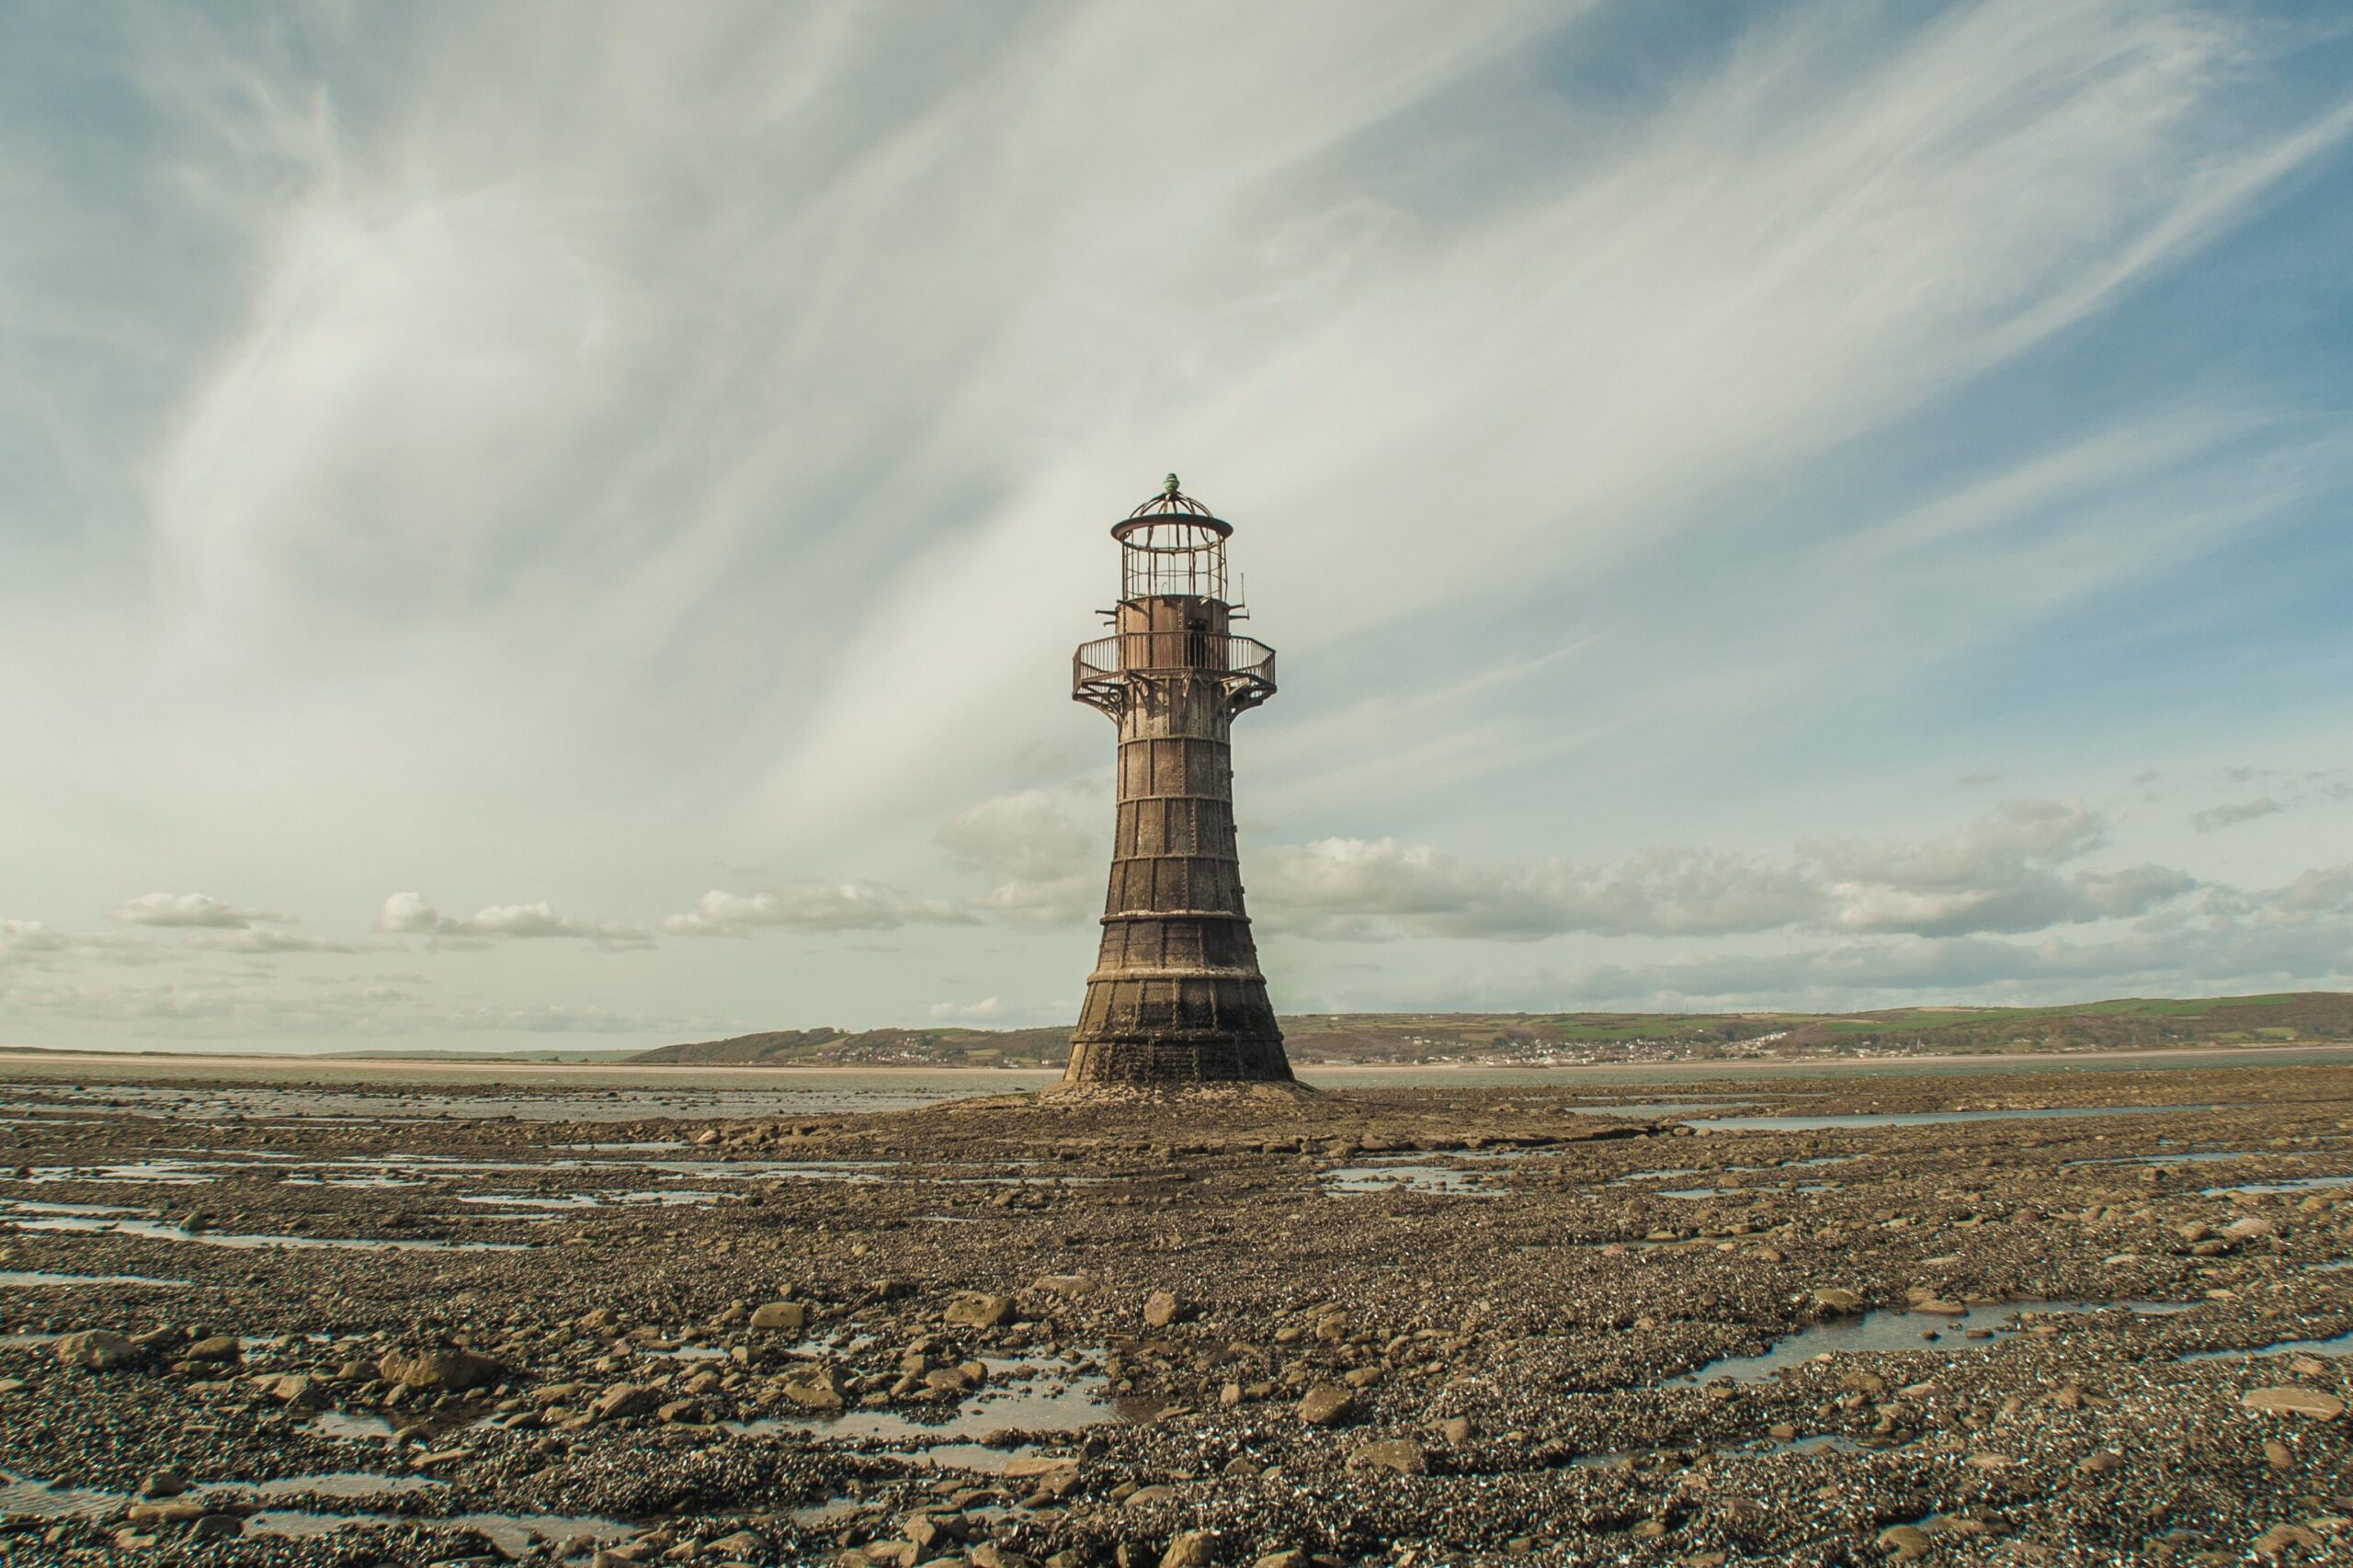 A decayed lighthouse in a desolate low tide looking zone.